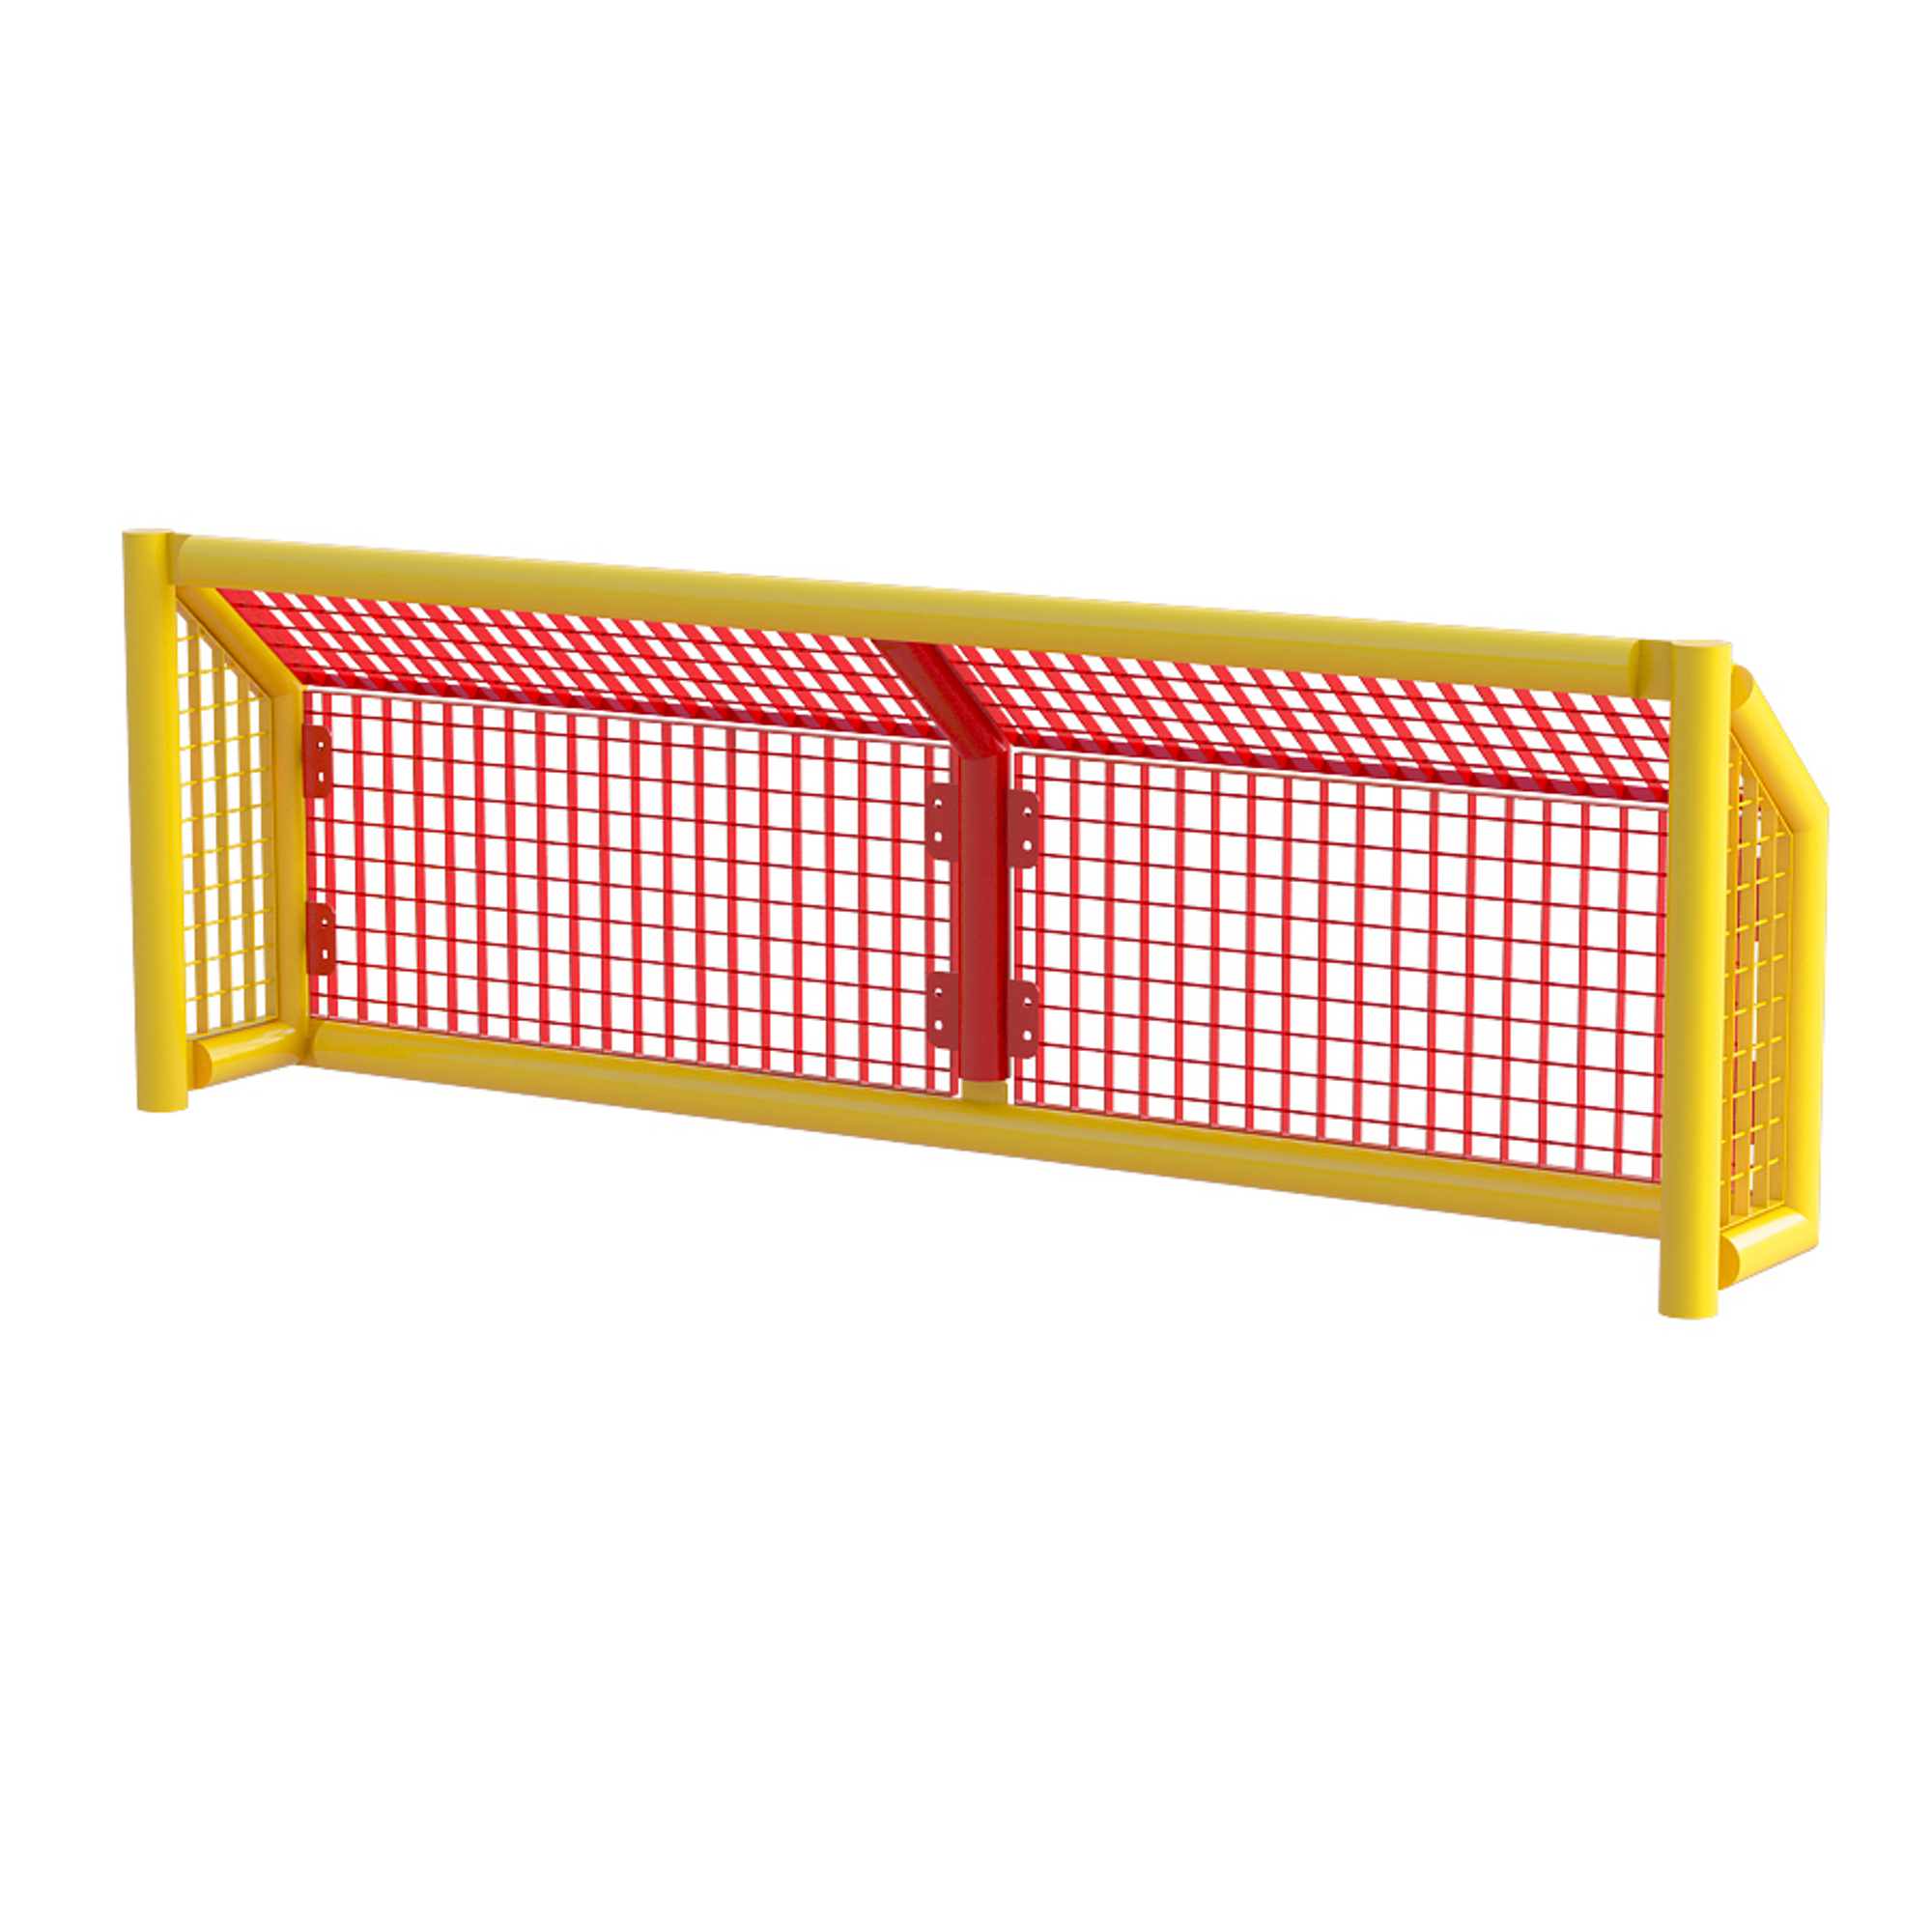 Primary 5aside Goal Recess Yel Frame Red